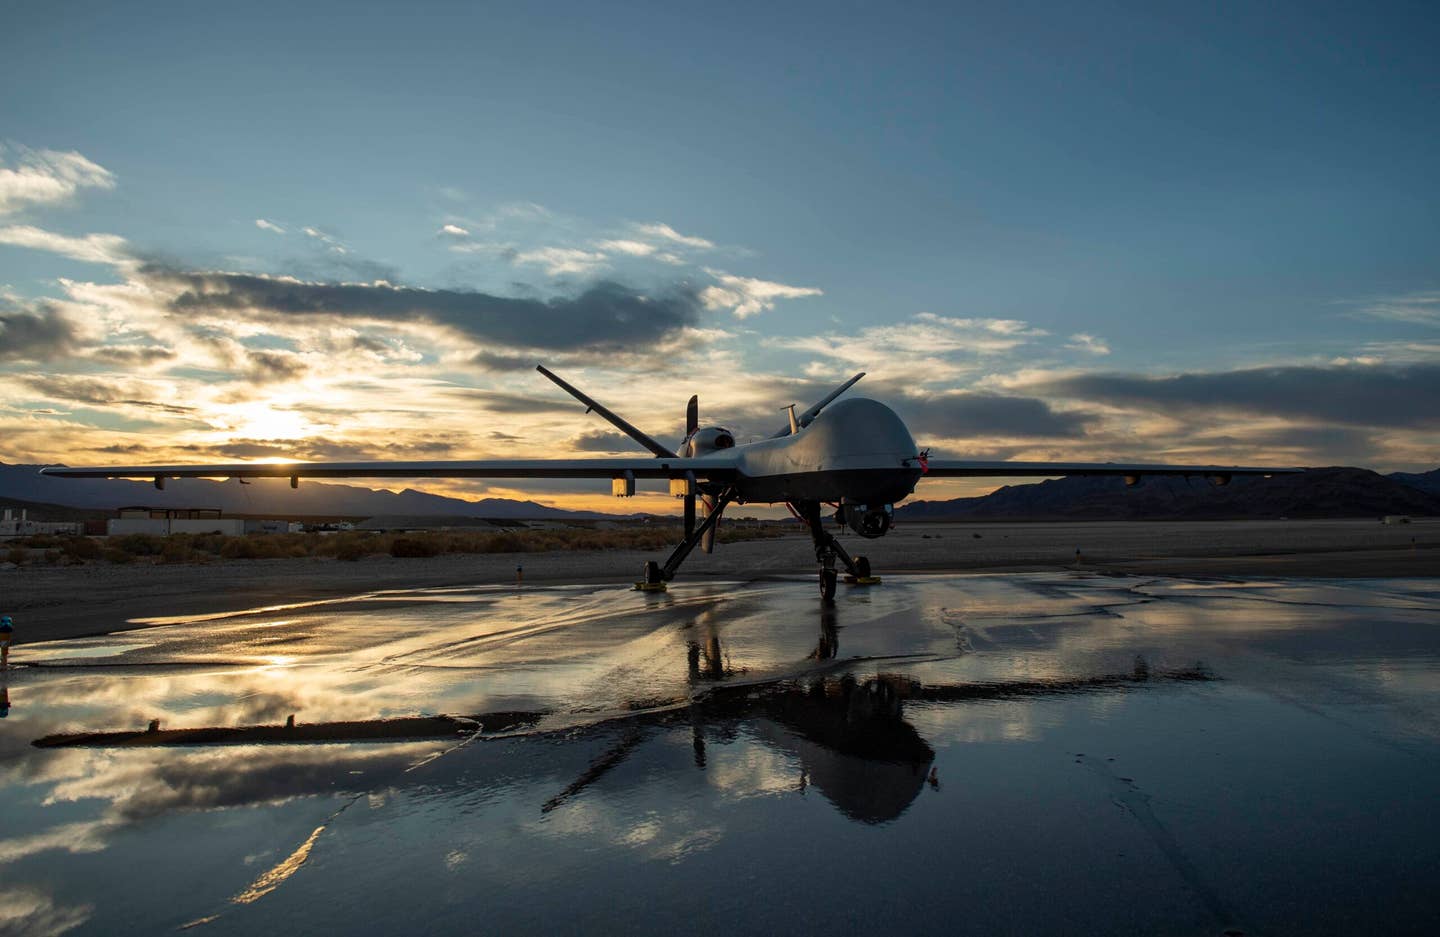 An MQ-9 Reaper sits on the runway during sunset at Creech Air Force Base, Nevada. <em>U.S. Air Force photo by Staff Sgt. Lauren Silverthorne</em>